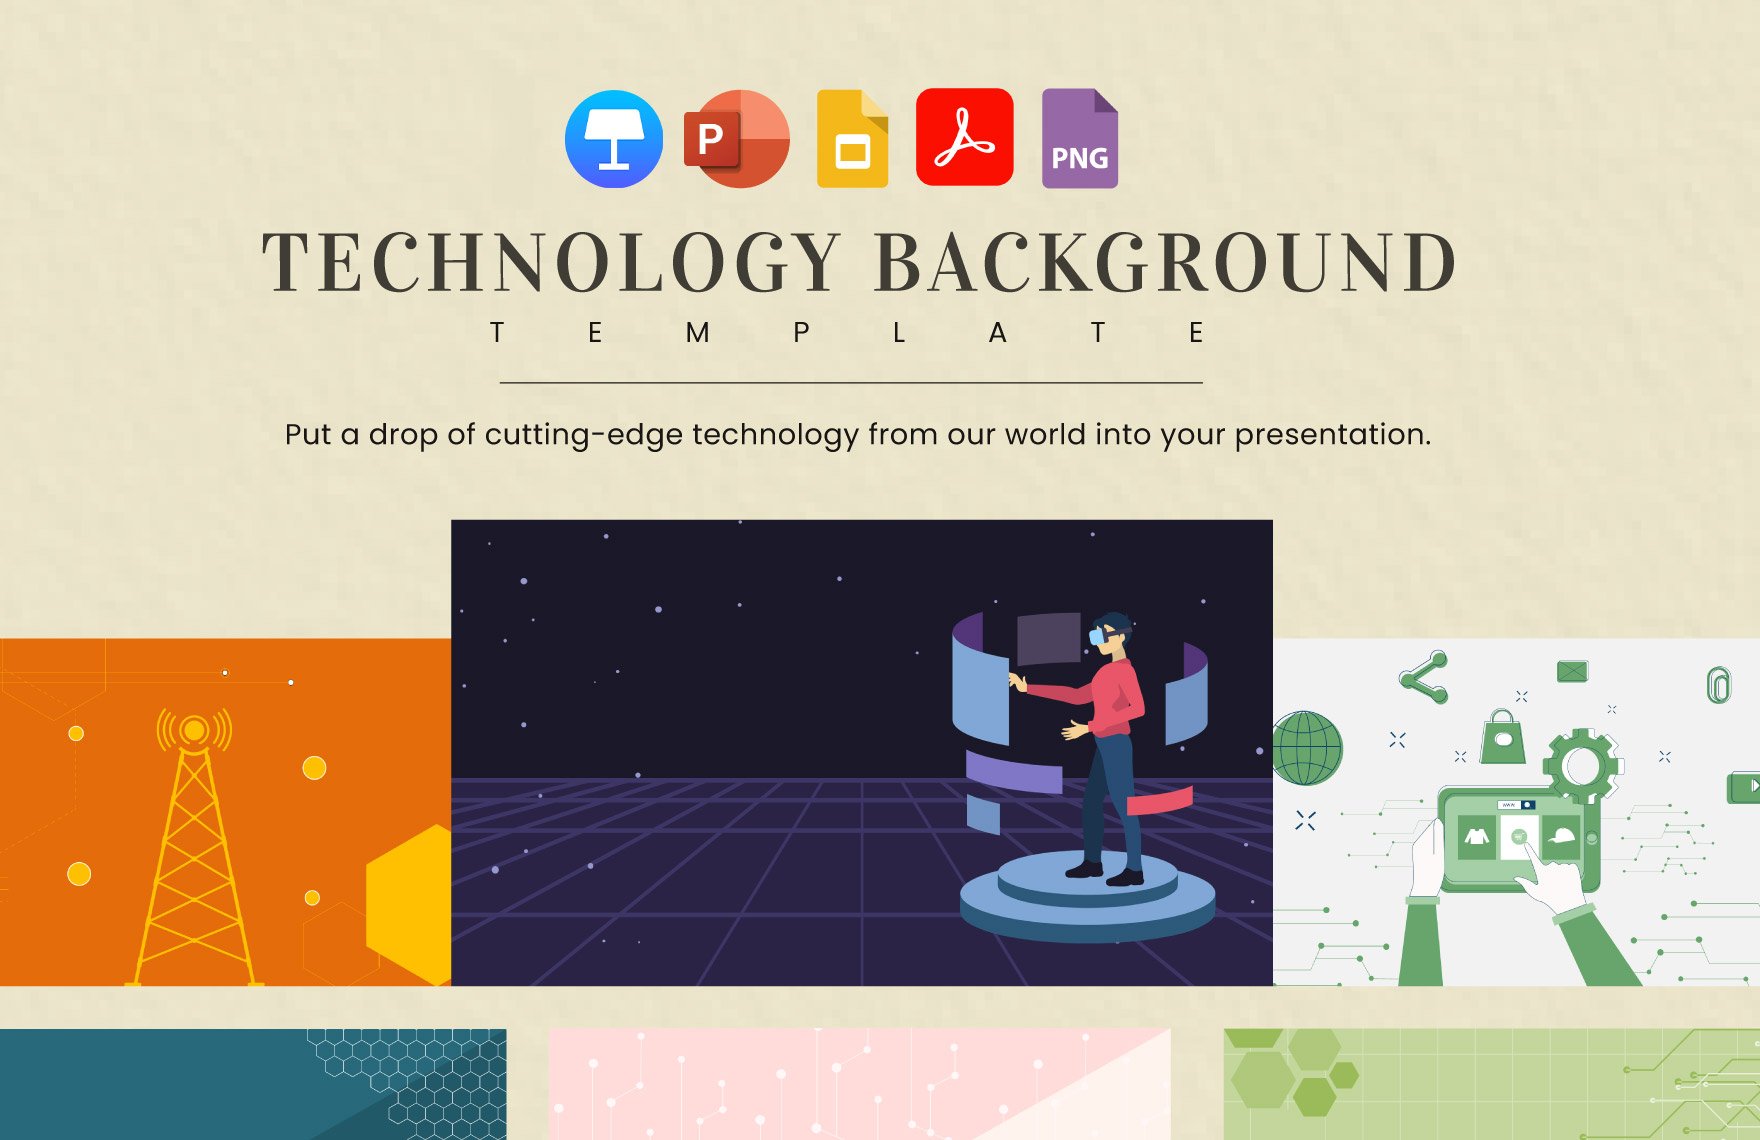 Technology Background Template in PDF, PowerPoint, Google Slides, Apple Keynote, PNG